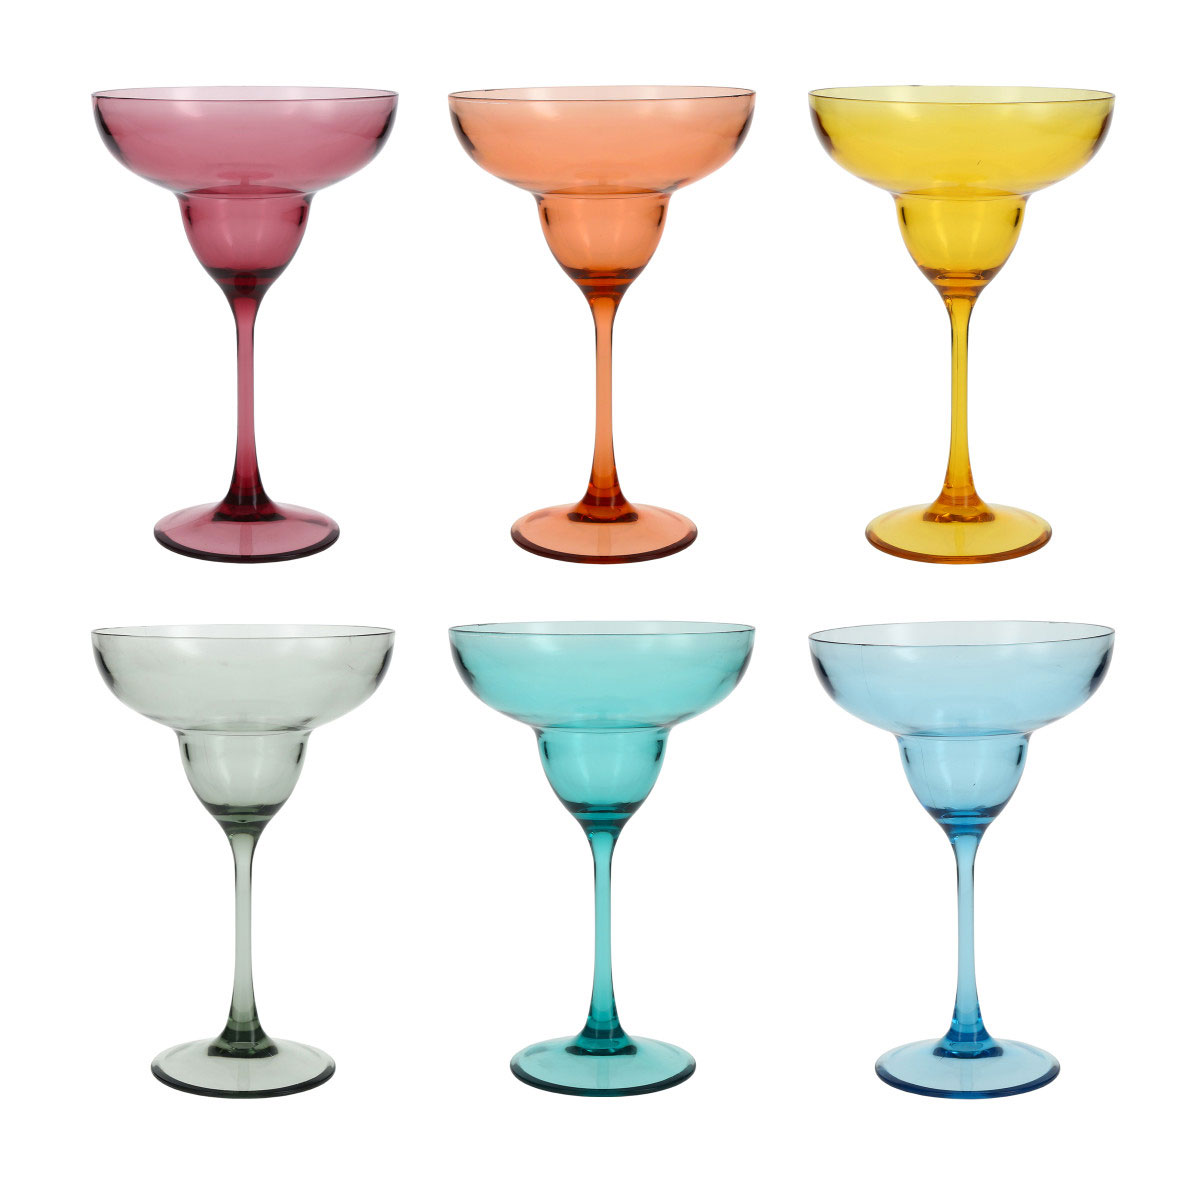 Fortessa Copolyester Assorted Colors Outside Margarita Glass, Set of 6